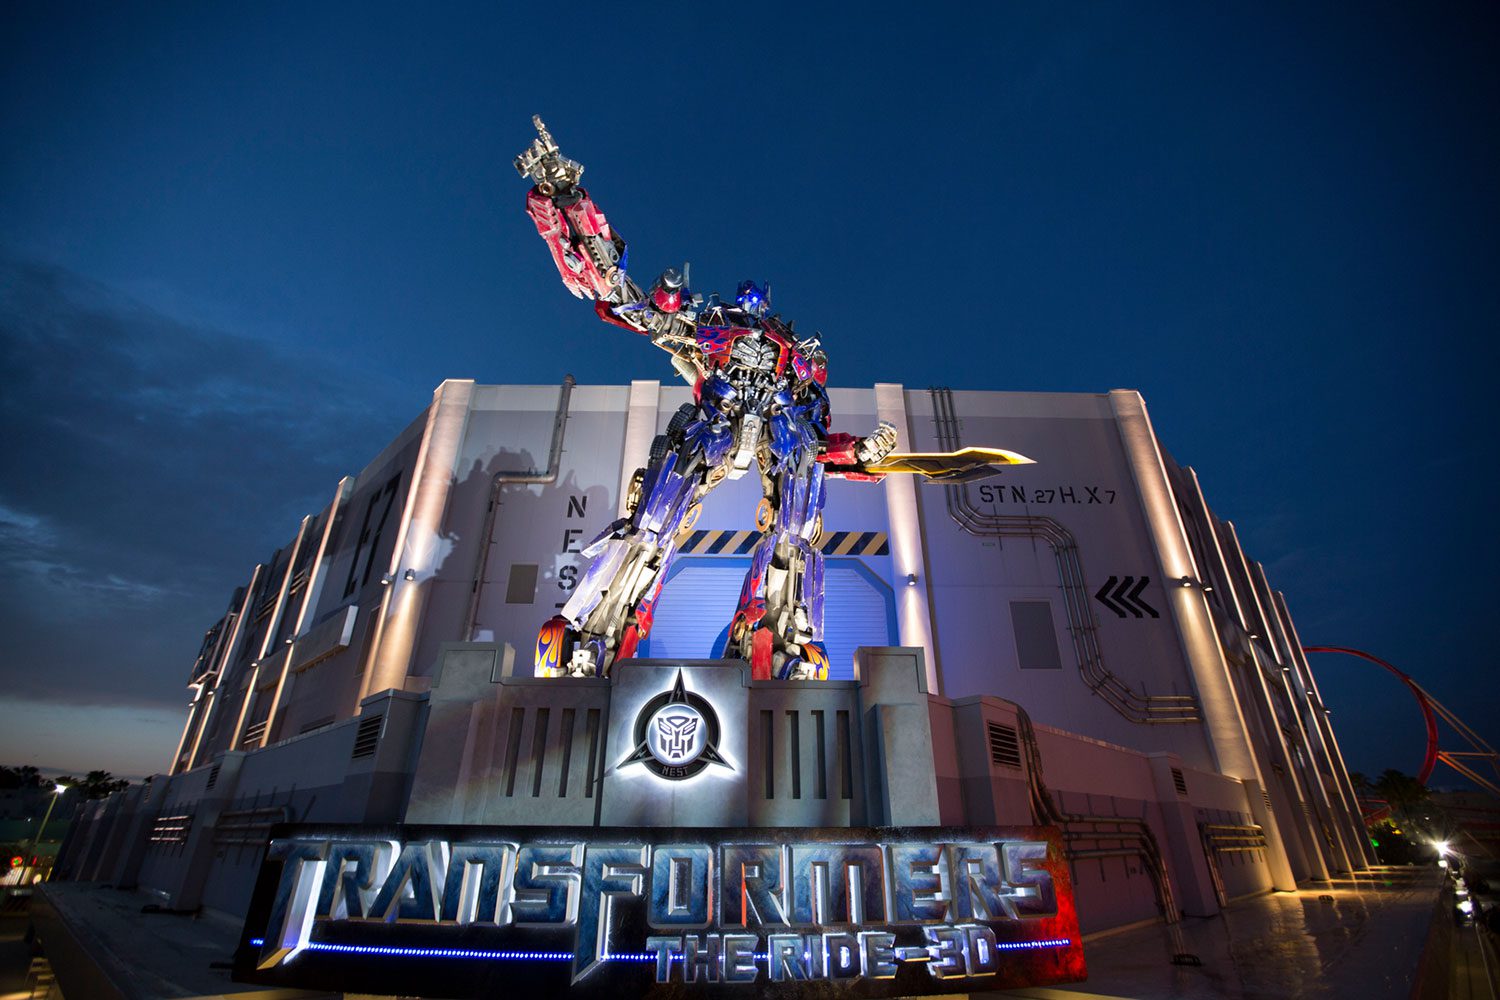 Transformers ride with robot statue